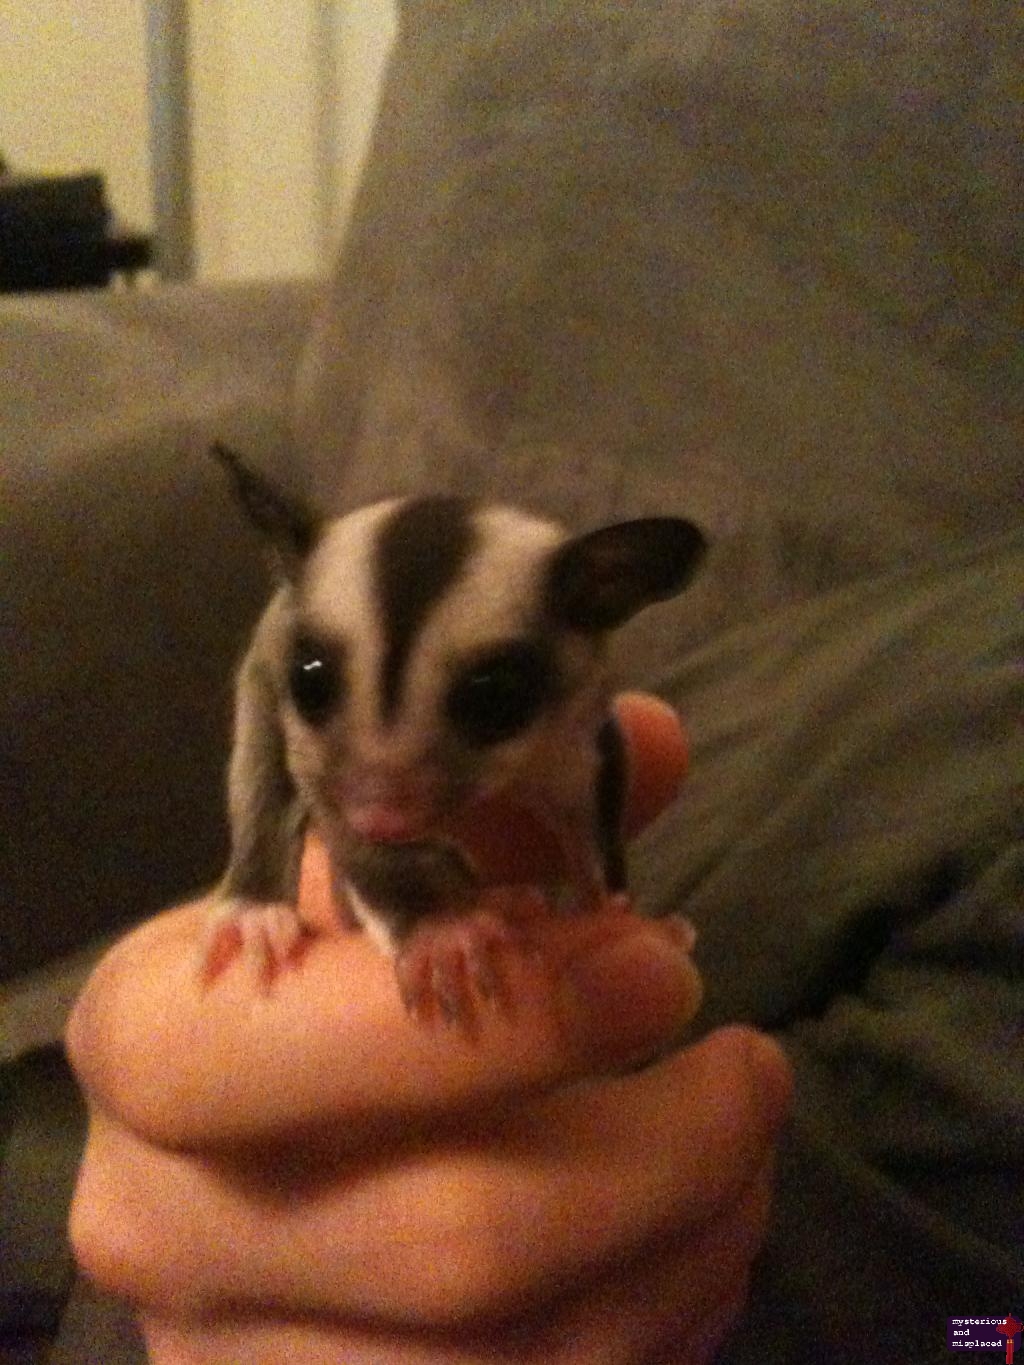 Baby Gliders For Sale